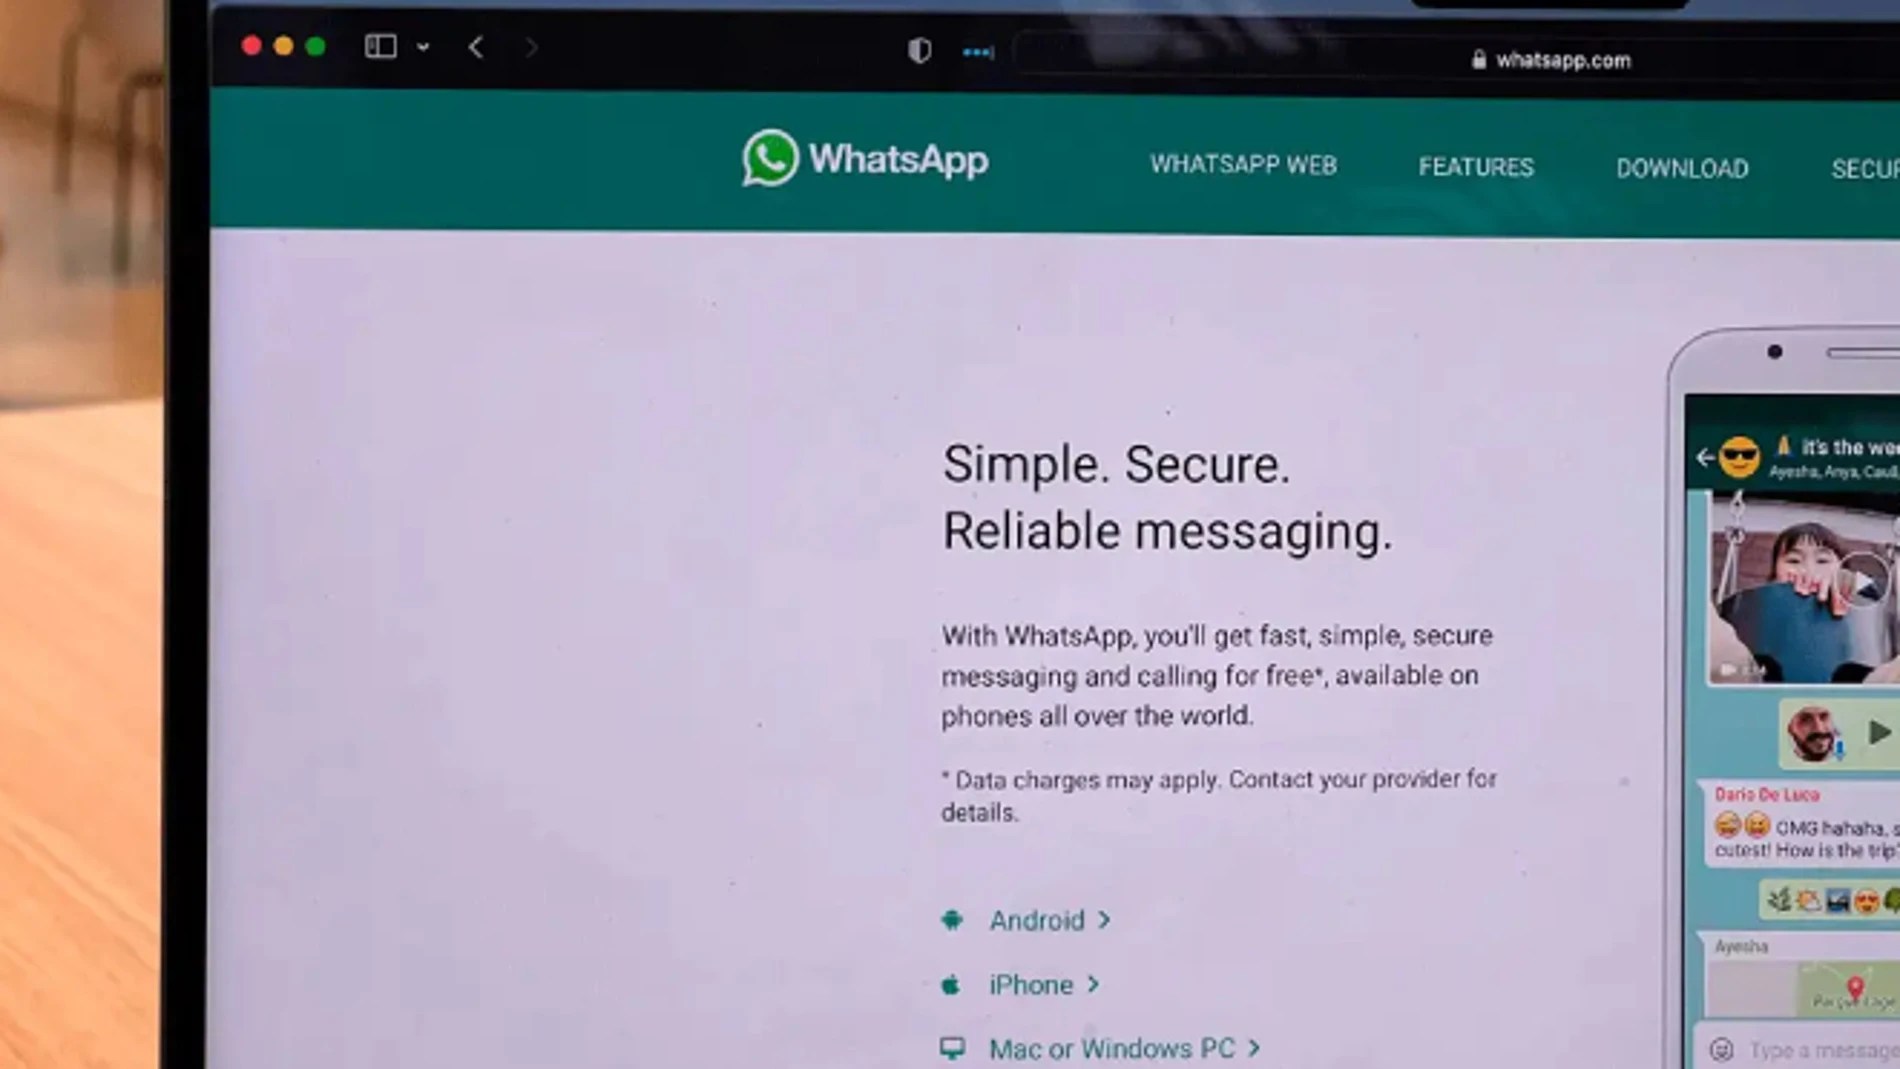 WhatsApp web trick to read messages without them knowing